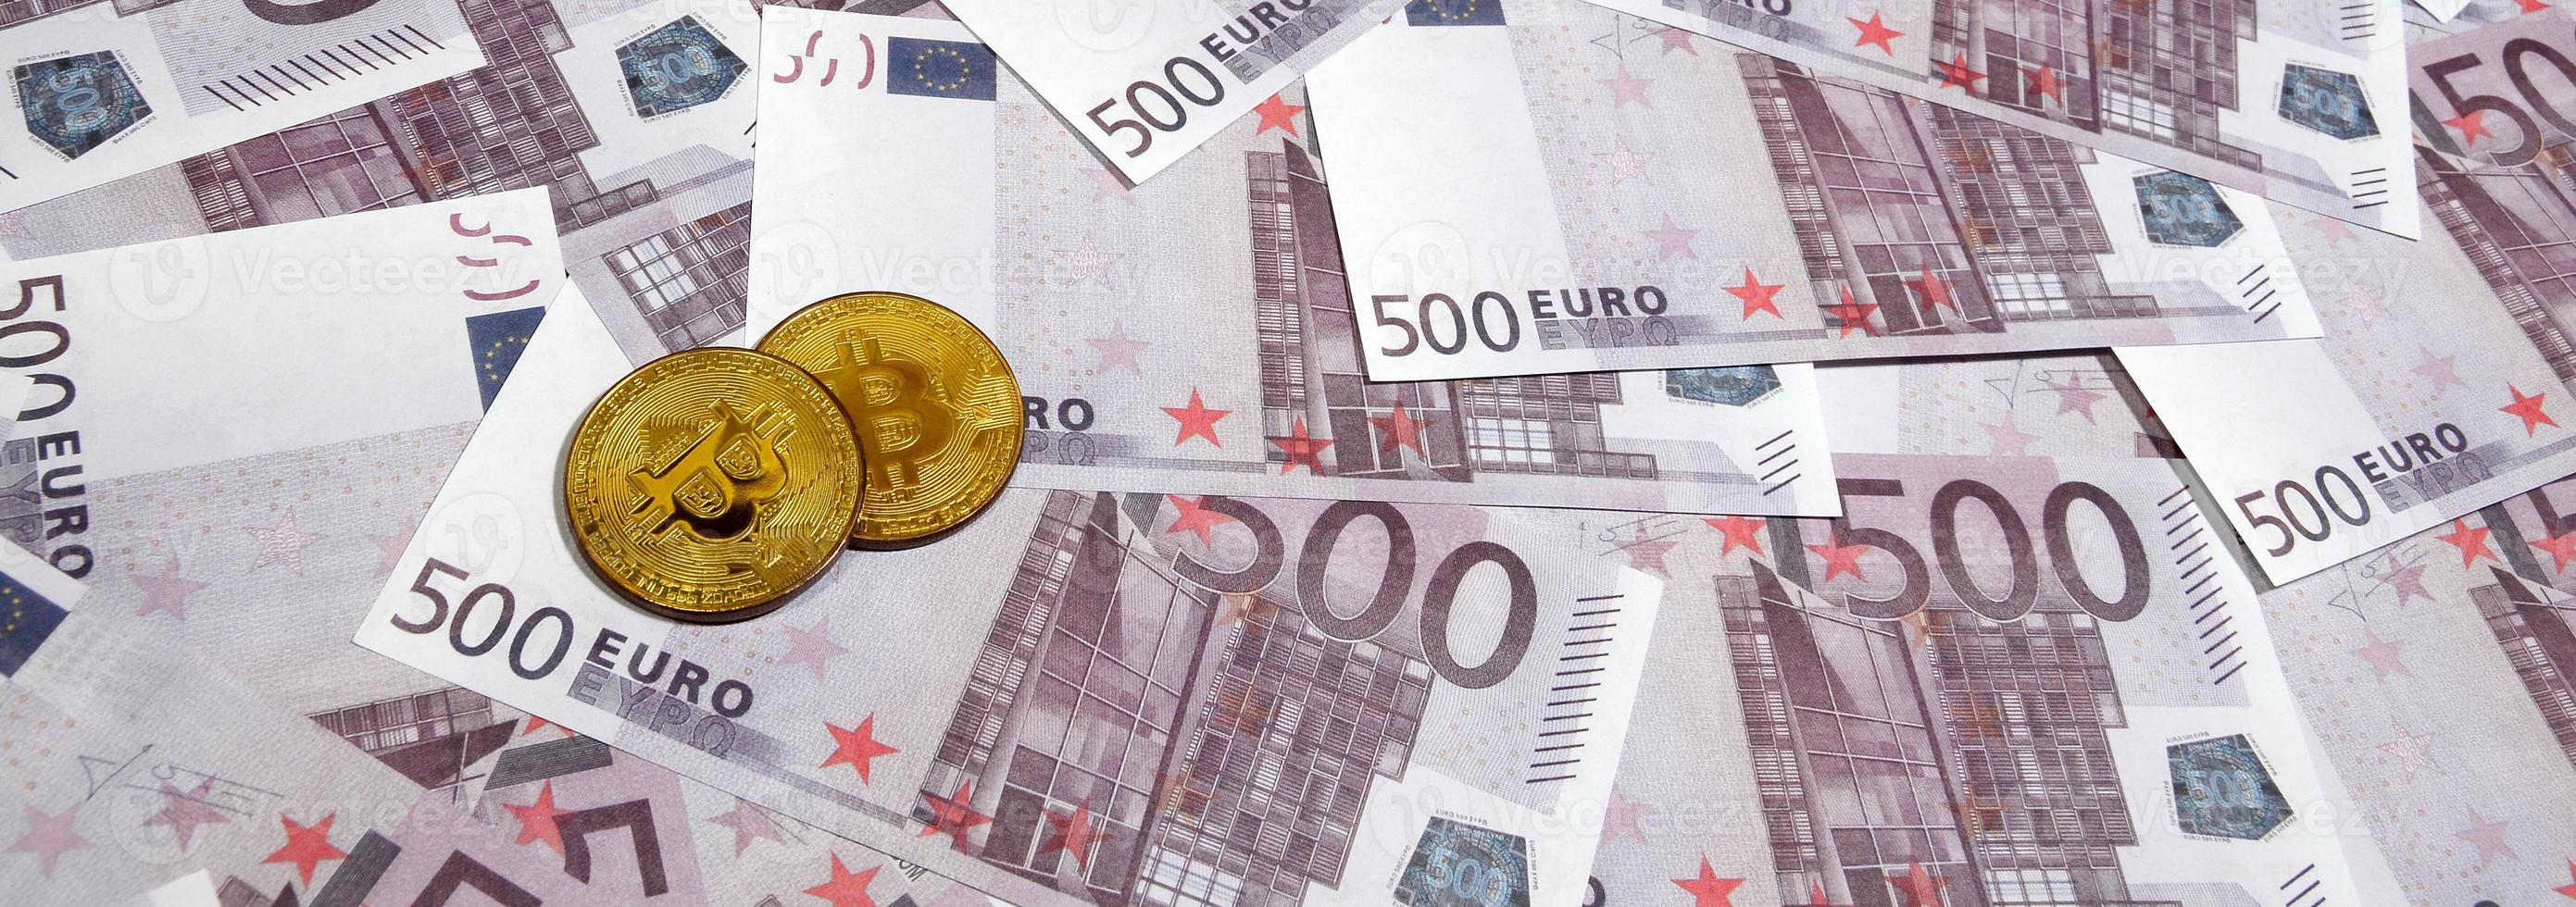 EUR to BTC Exchange Rate | Euro to Bitcoin Conversion | Live Rate